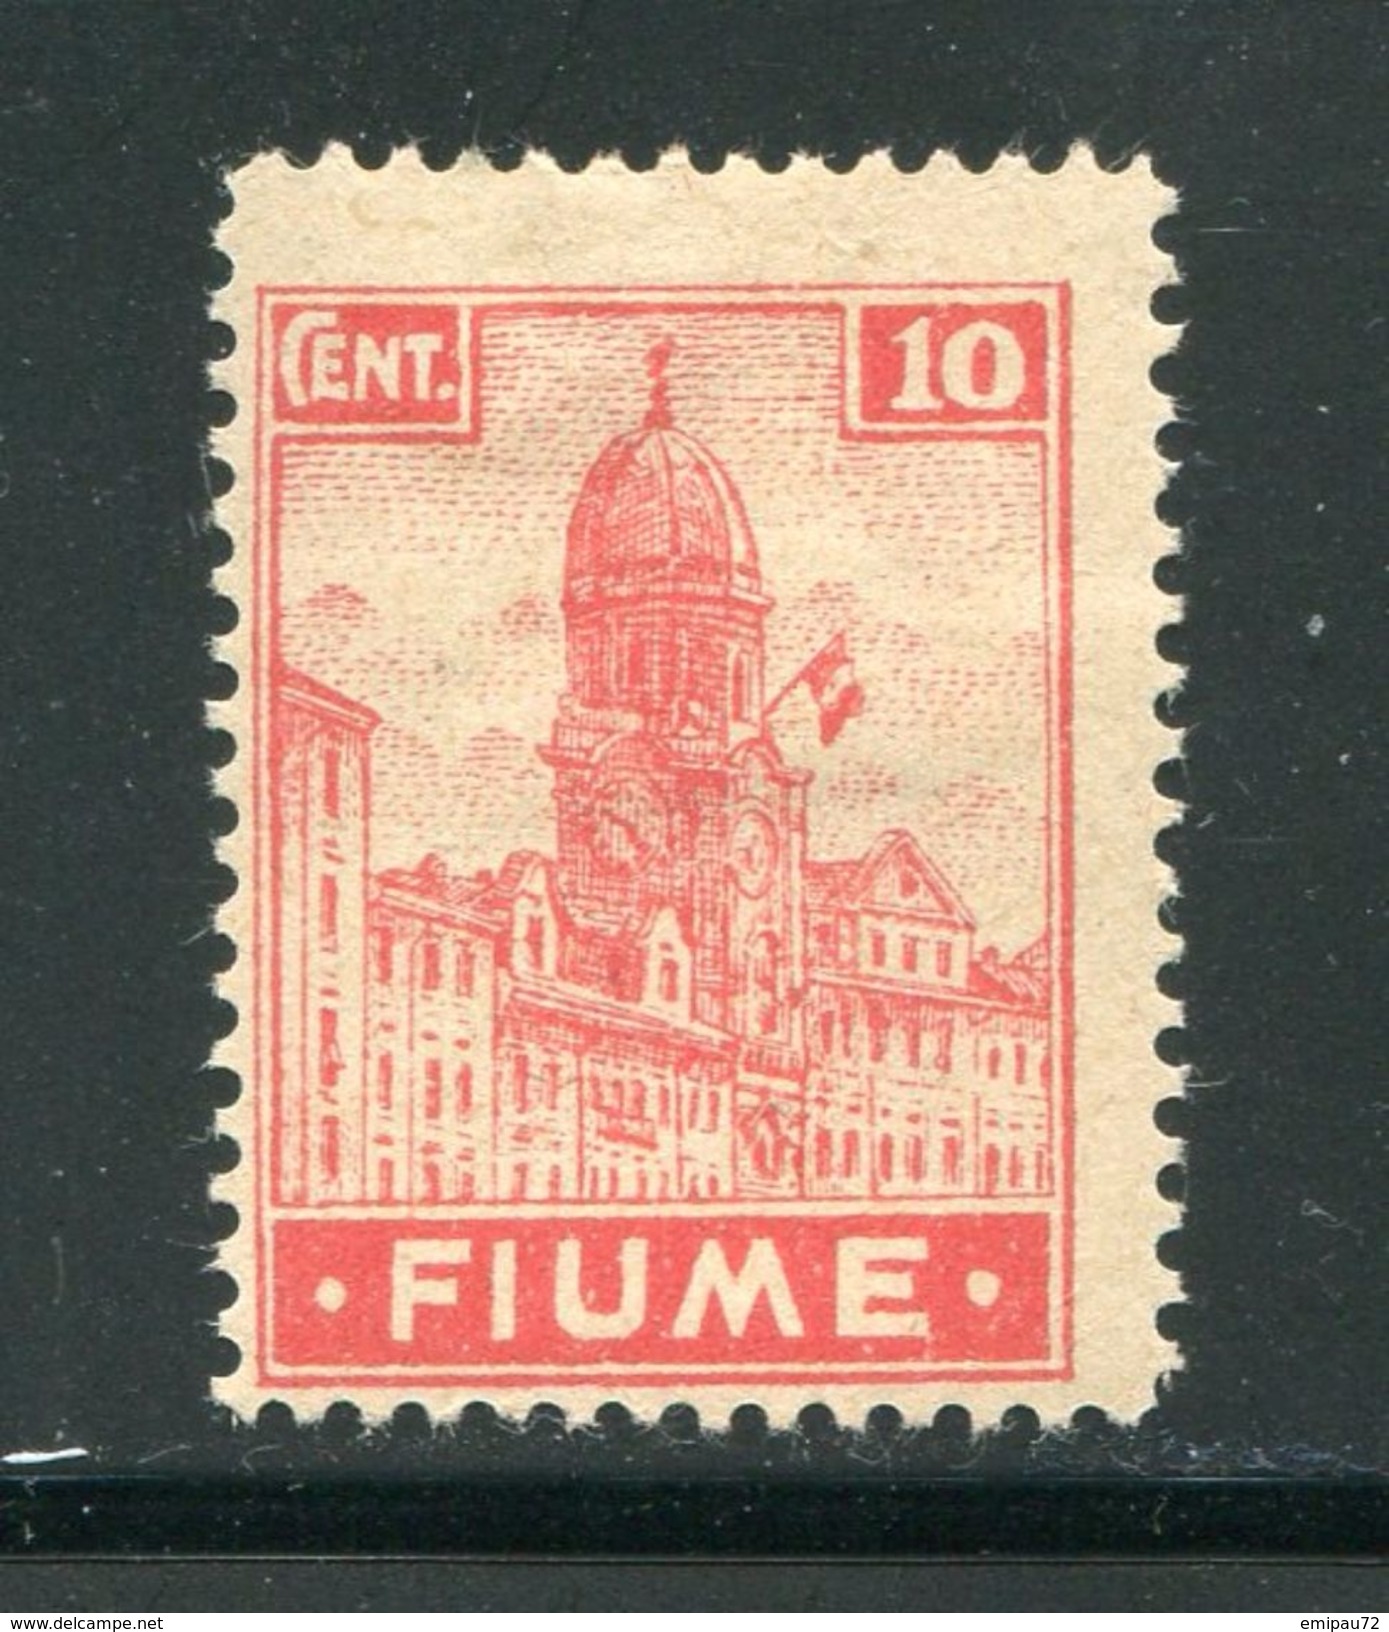 ITALIE- FIUME- Y&T N°35- Neuf Avec Charnière * - Occup. Iugoslava: Fiume